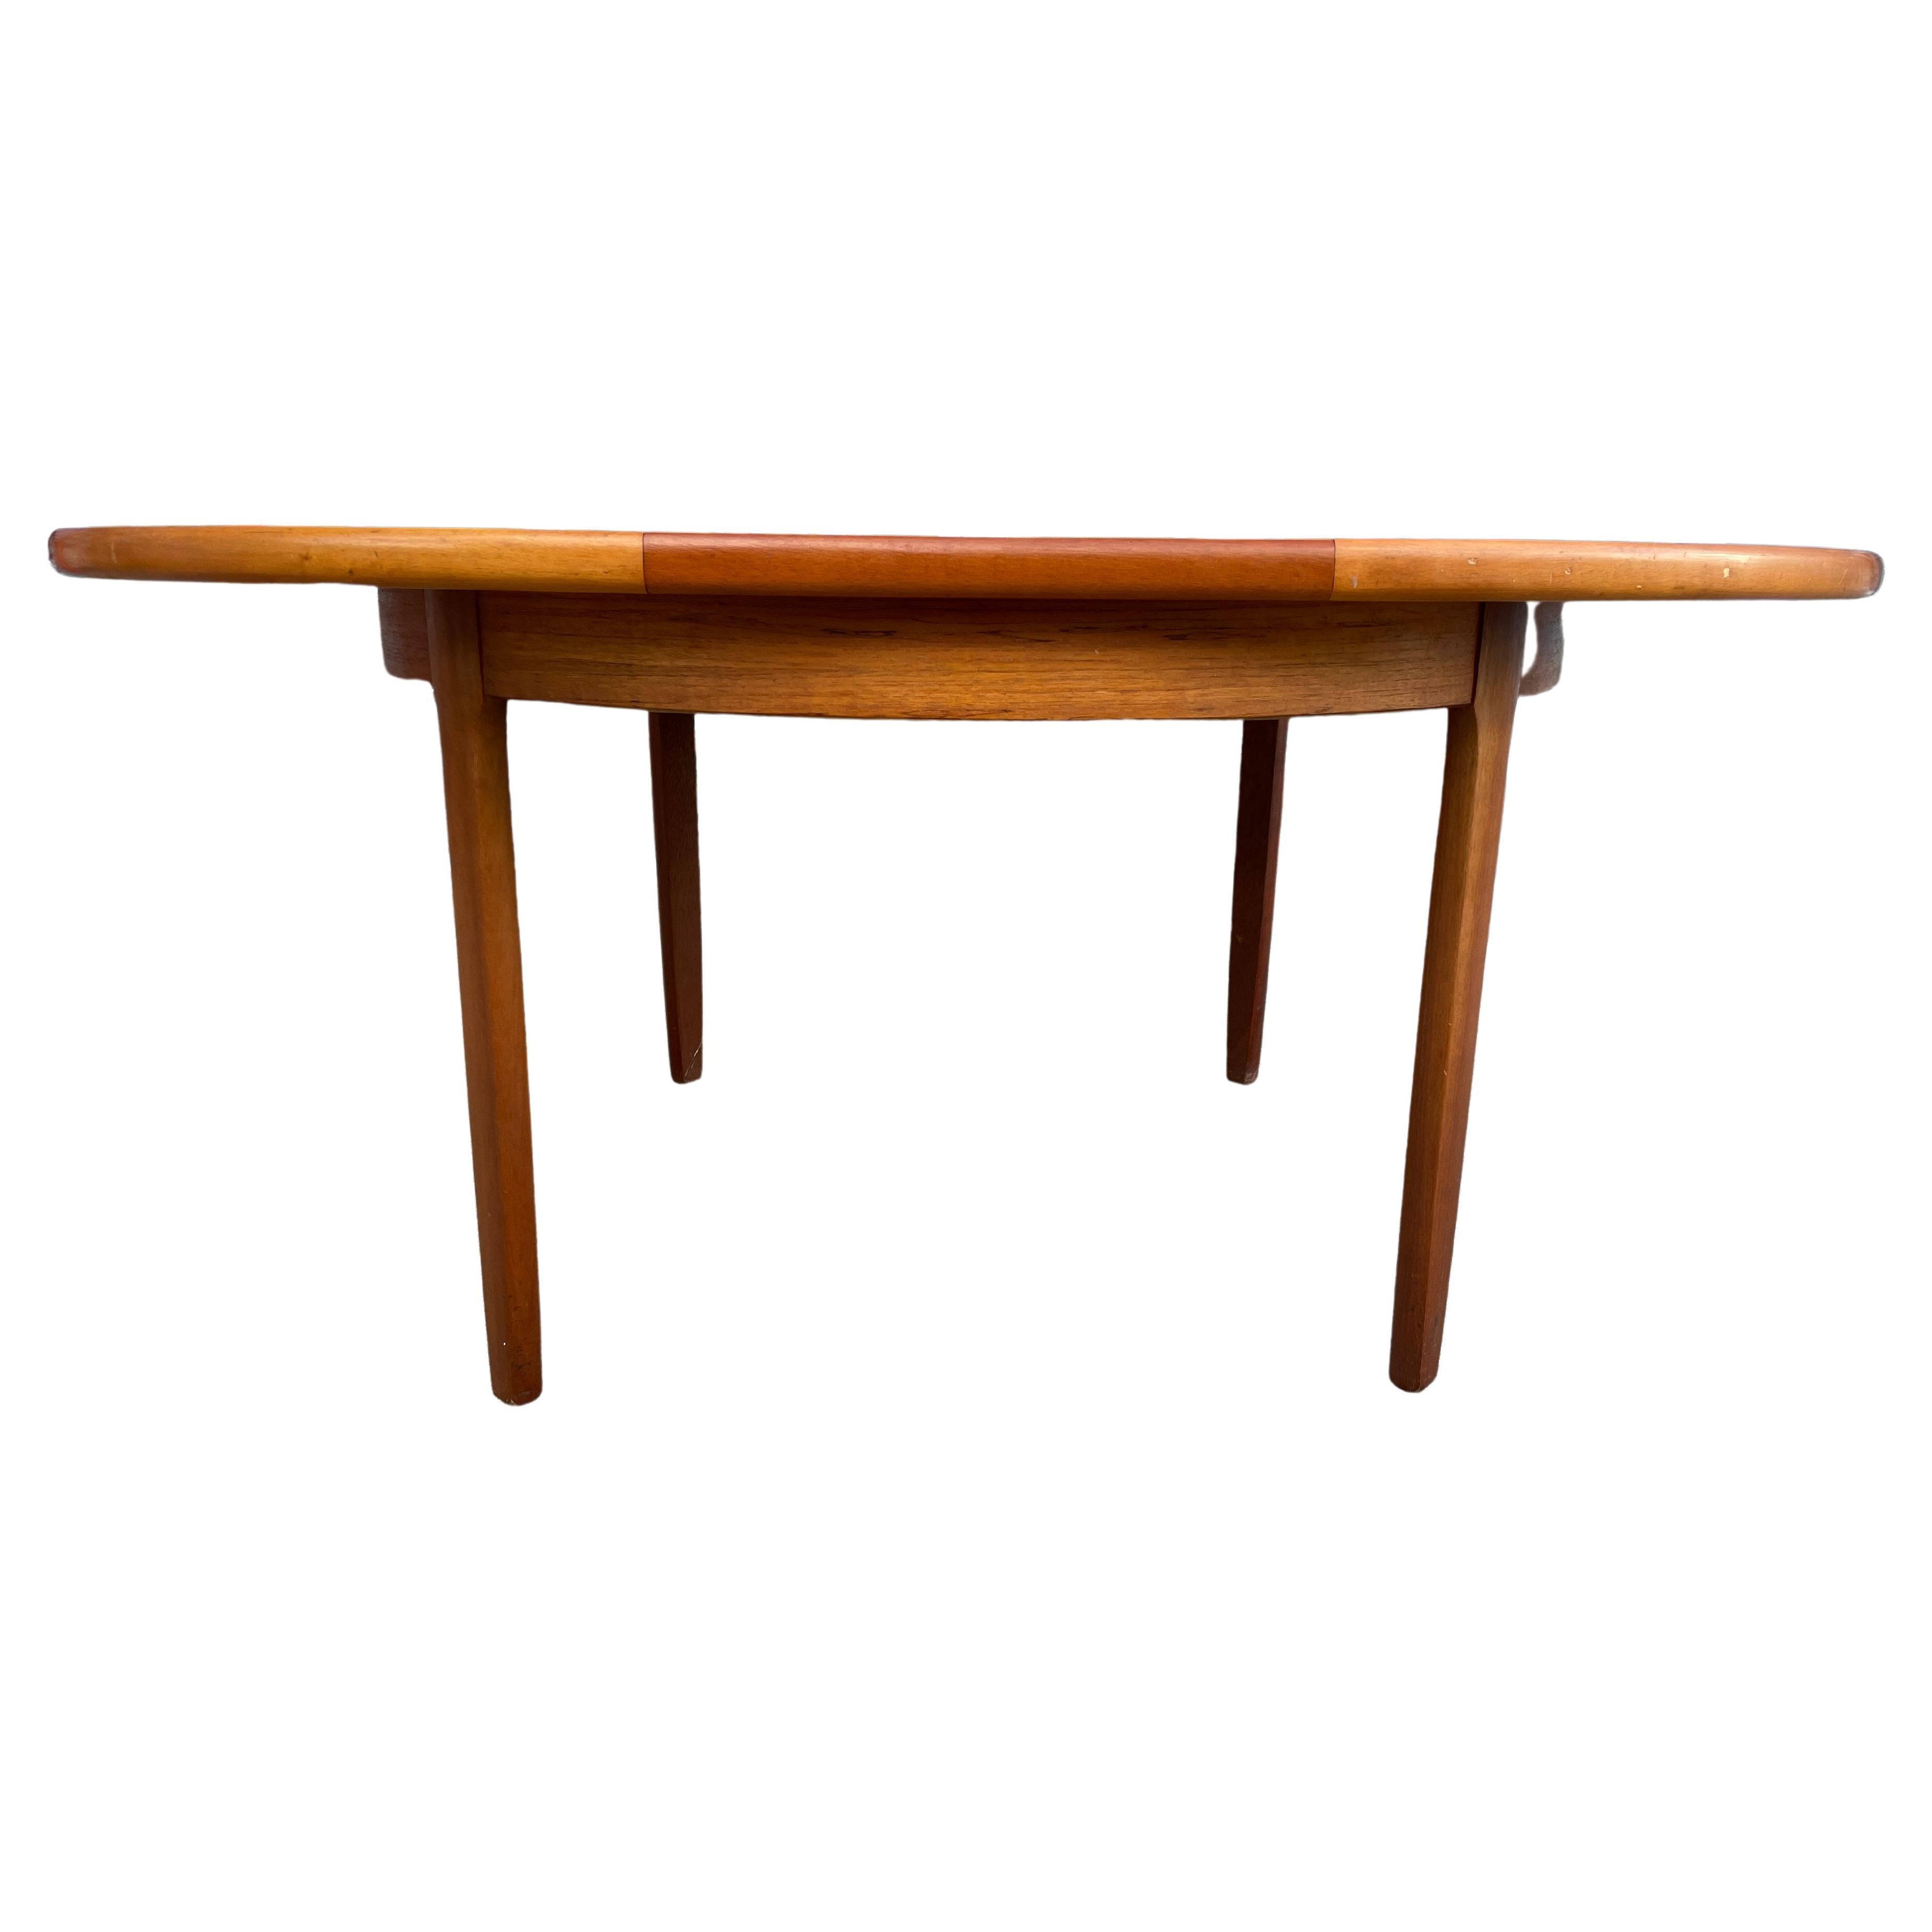 Mid century teak round Danish Modern extension dining table with 1 nesting pop up leaf. This table has solid teak legs and is in good vintage condition shows little signs of use. The leaf appears to never have been used and appears darker in color